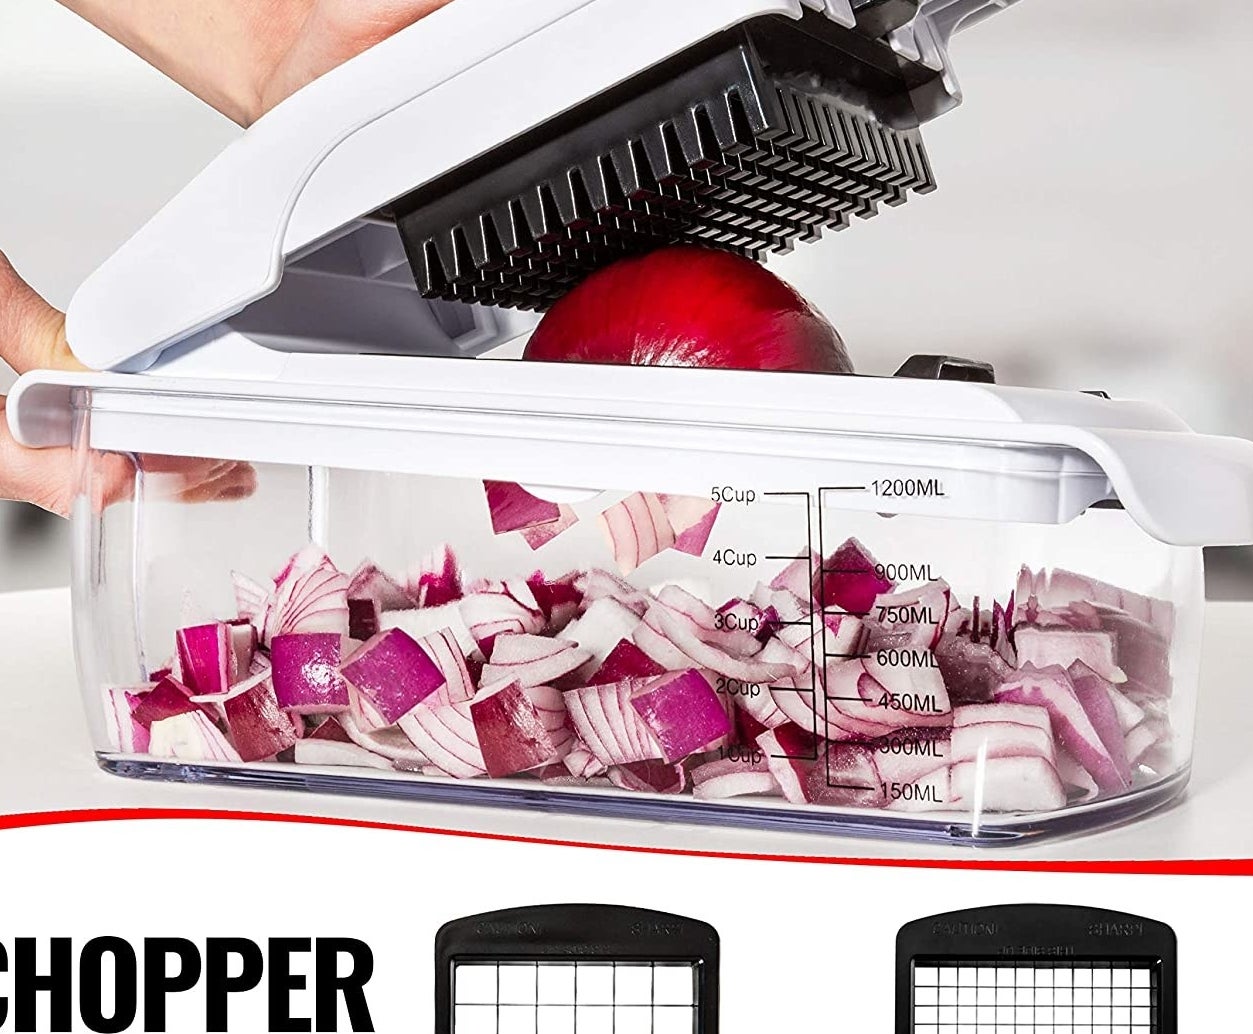 A person chopping onions with the gadget